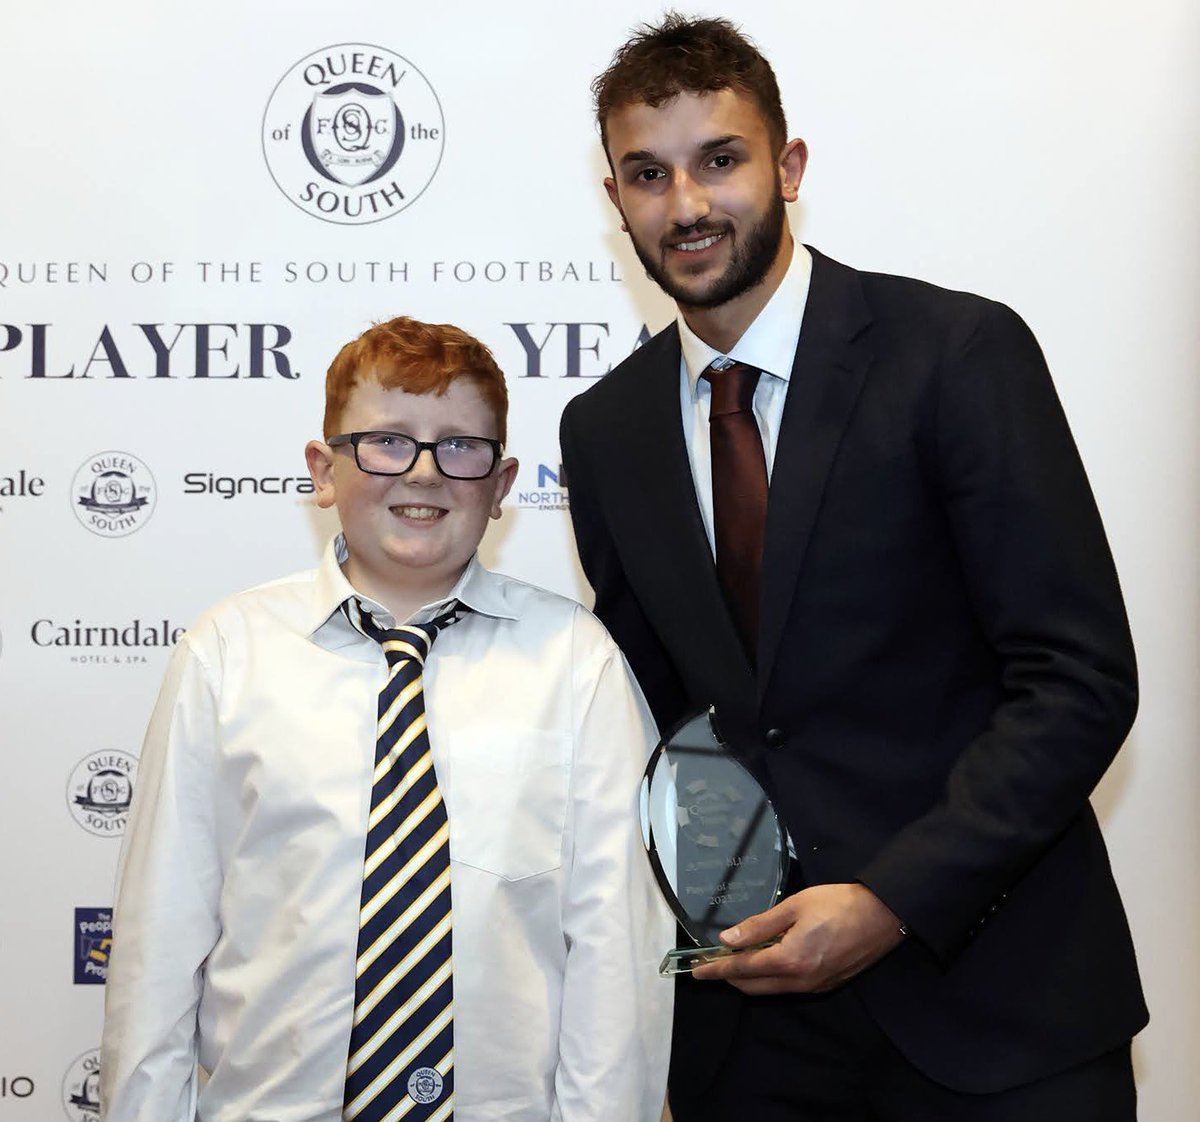 Delighted to have been named the Queens Trust player of the year, thanks to everyone involved 🙌🏼